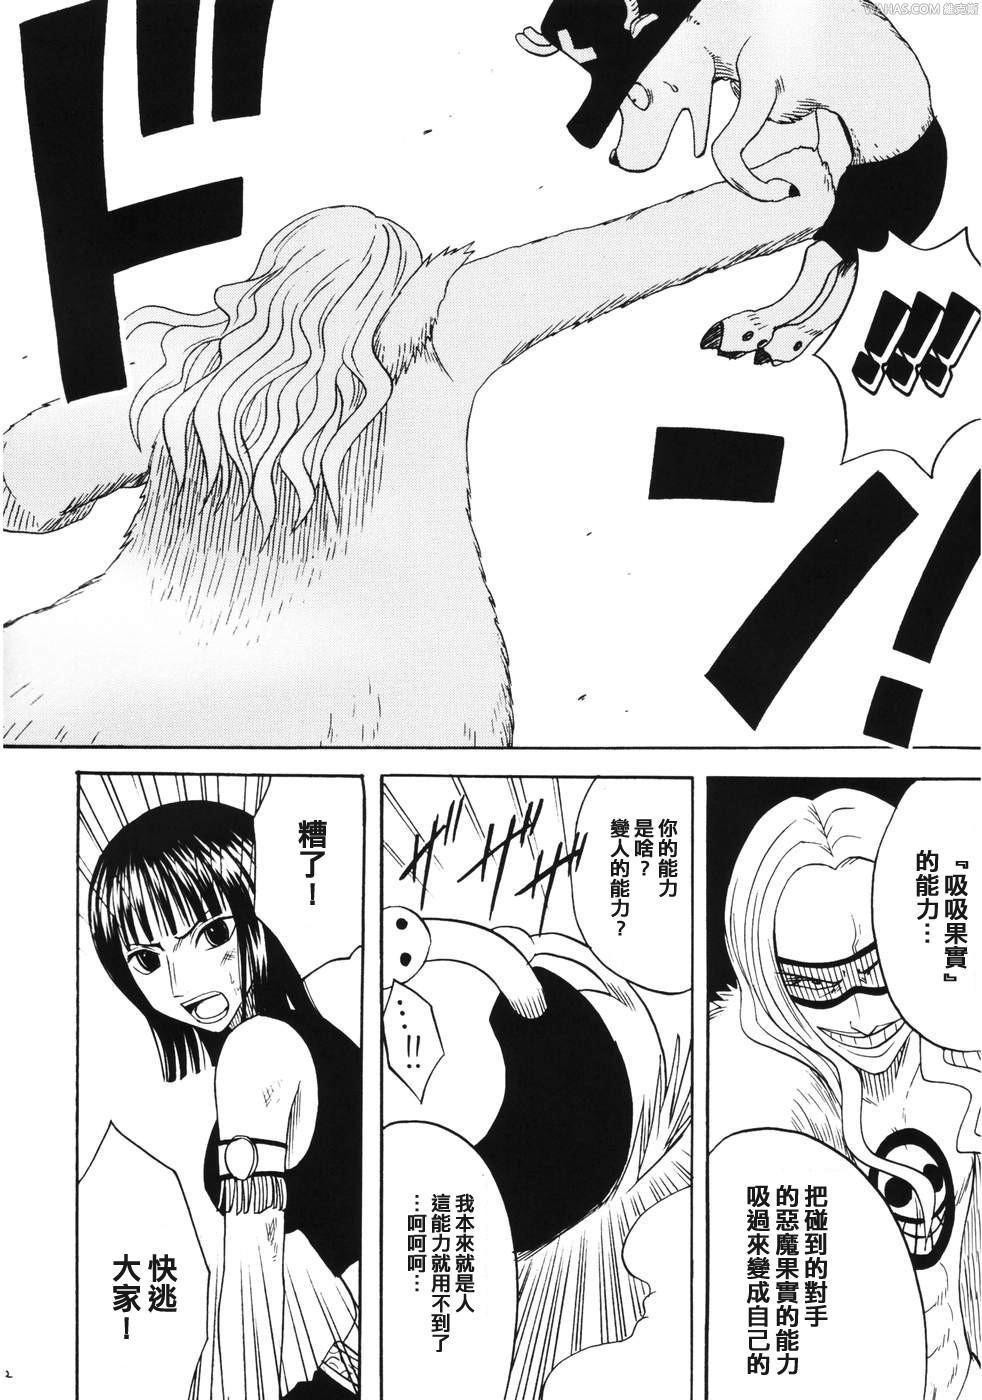 Spit Dancing Animation Run - One piece Raw - Page 11